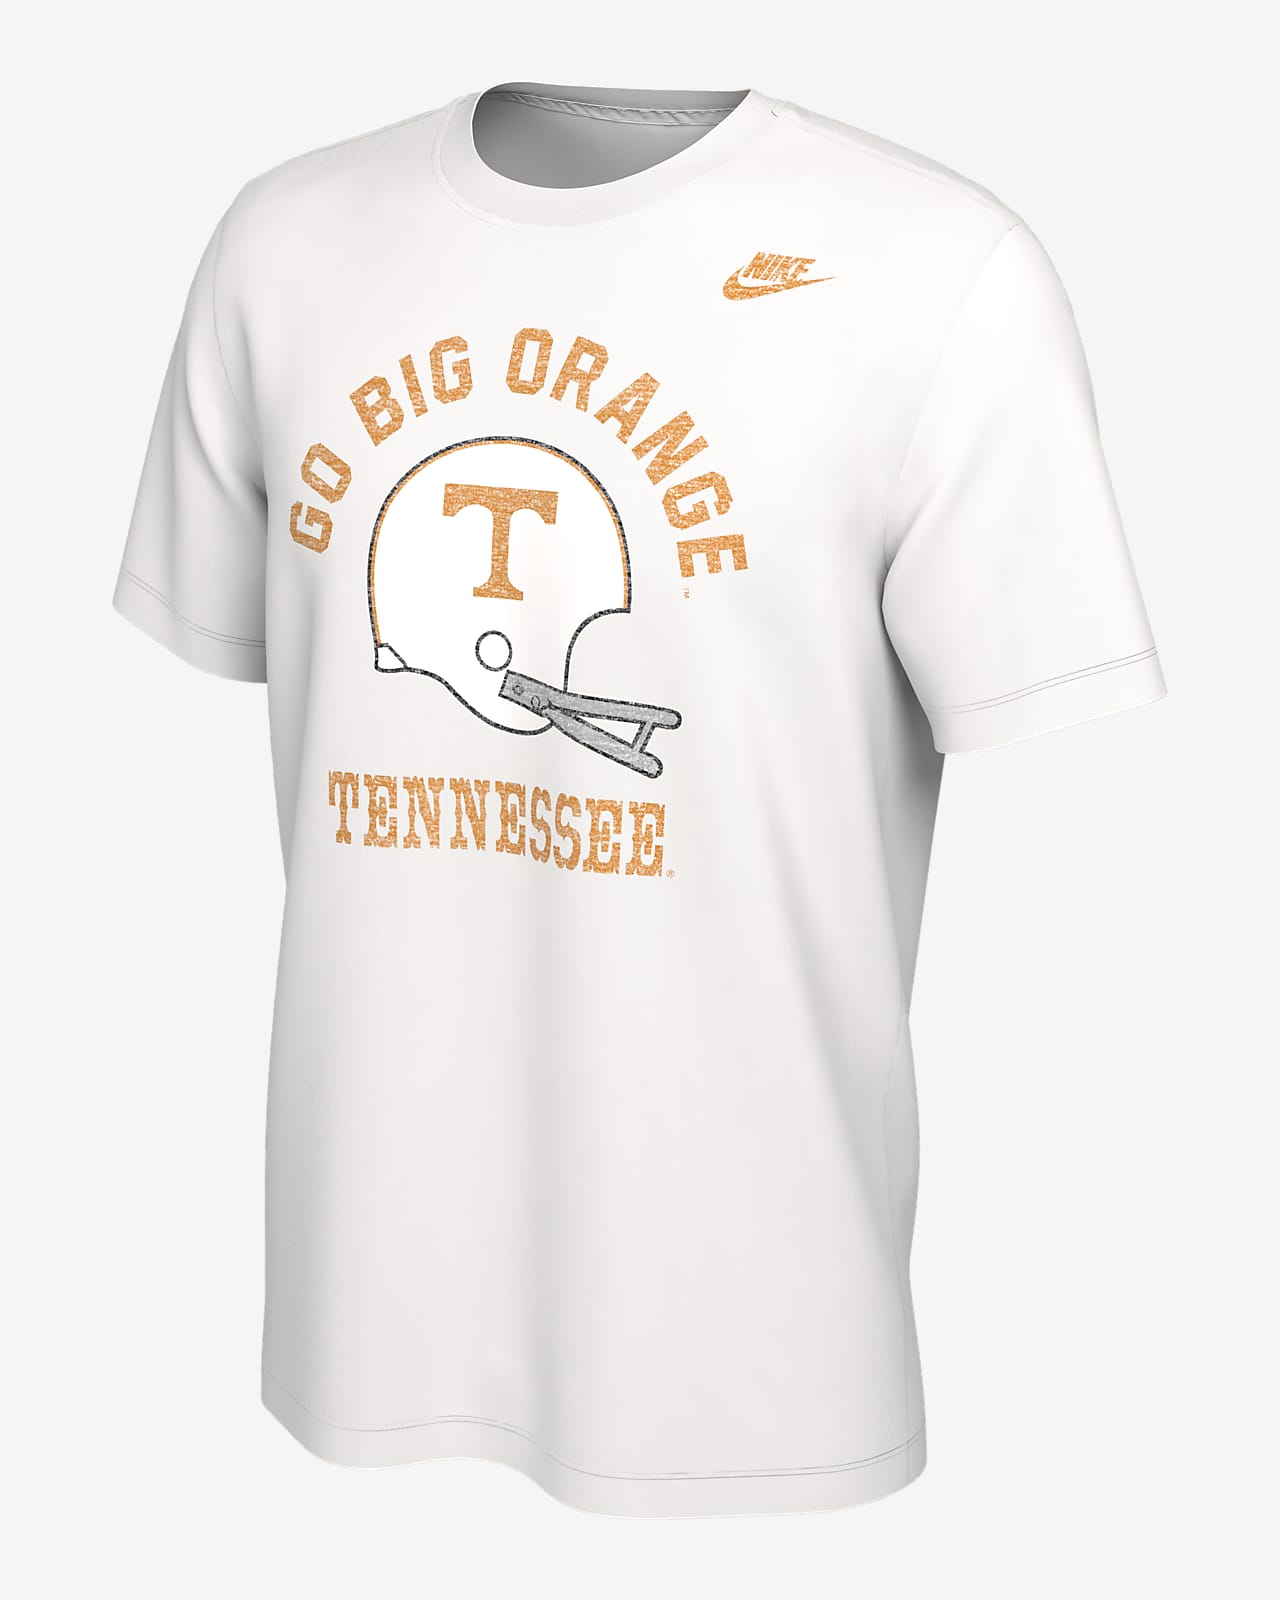 Tennessee Men's Nike College T-Shirt